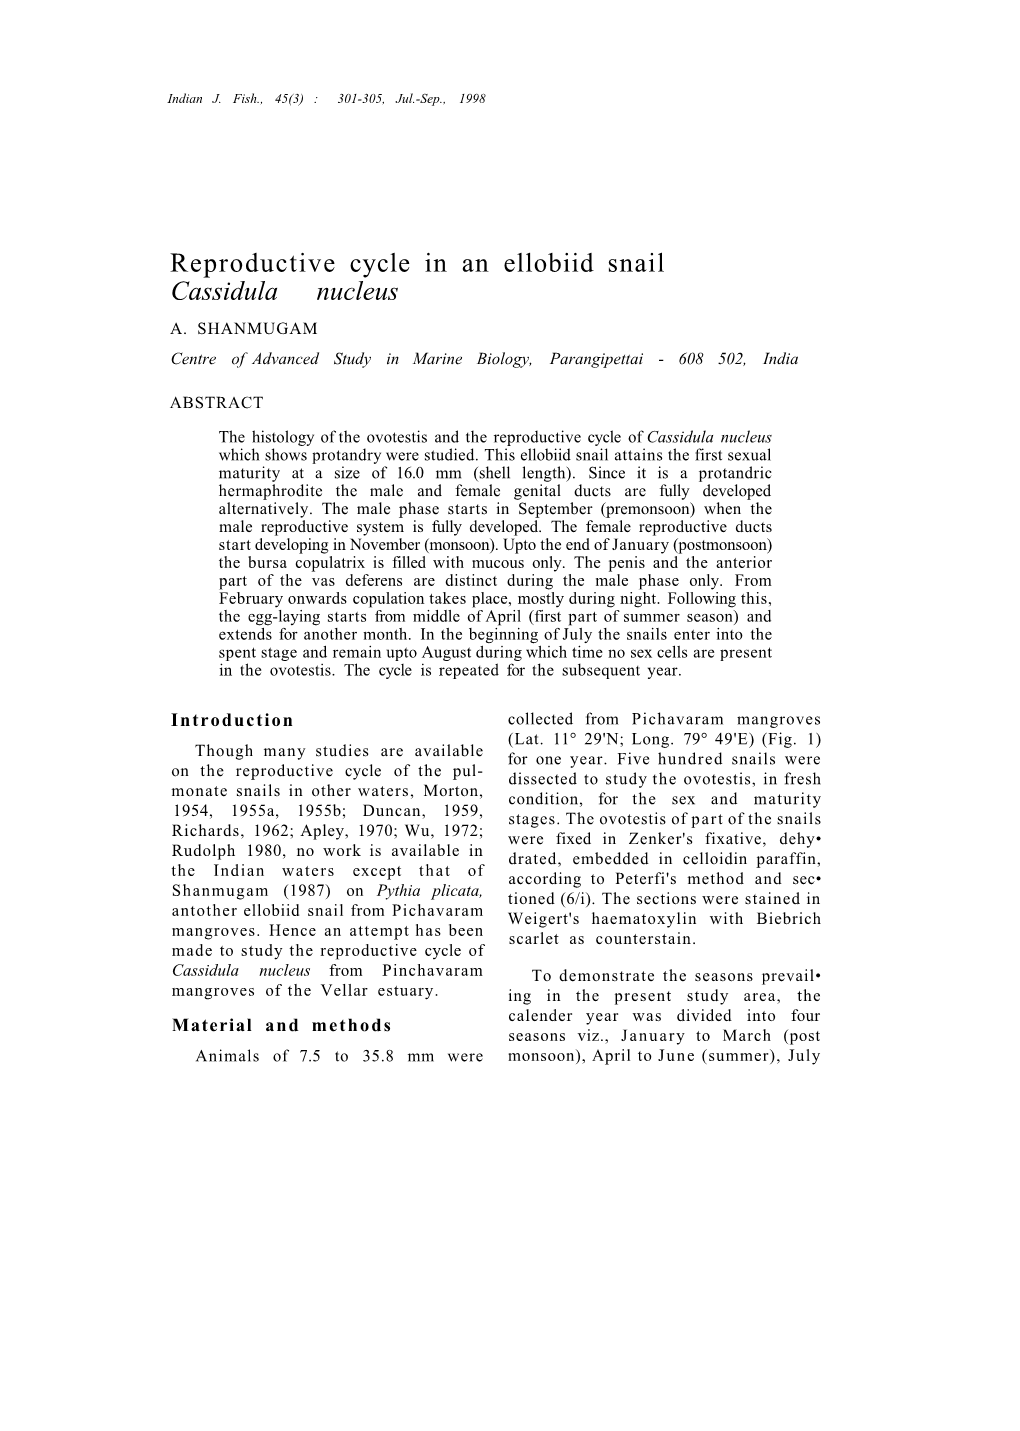 Reproductive Cycle in an Ellobiid Snail Cassidula Nucleus A